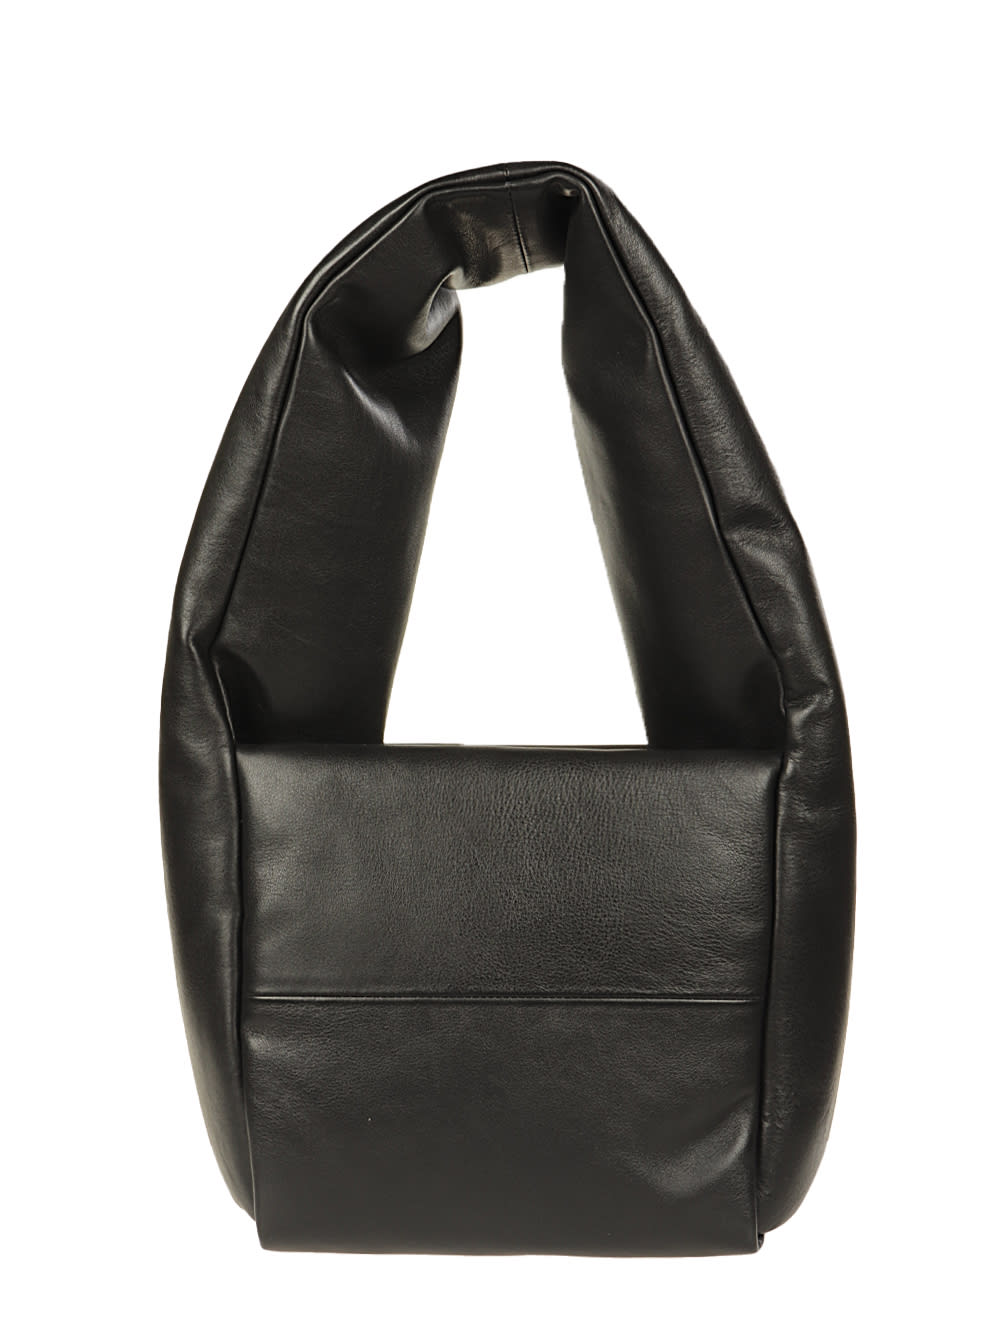 KASSL Editions Bag Monk Small Soft Leather